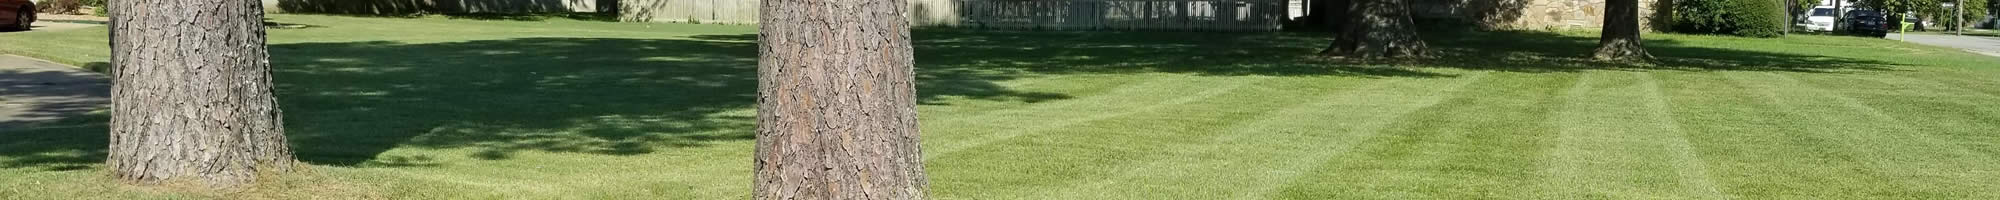 Lawn Care Landscaping Services Kennett